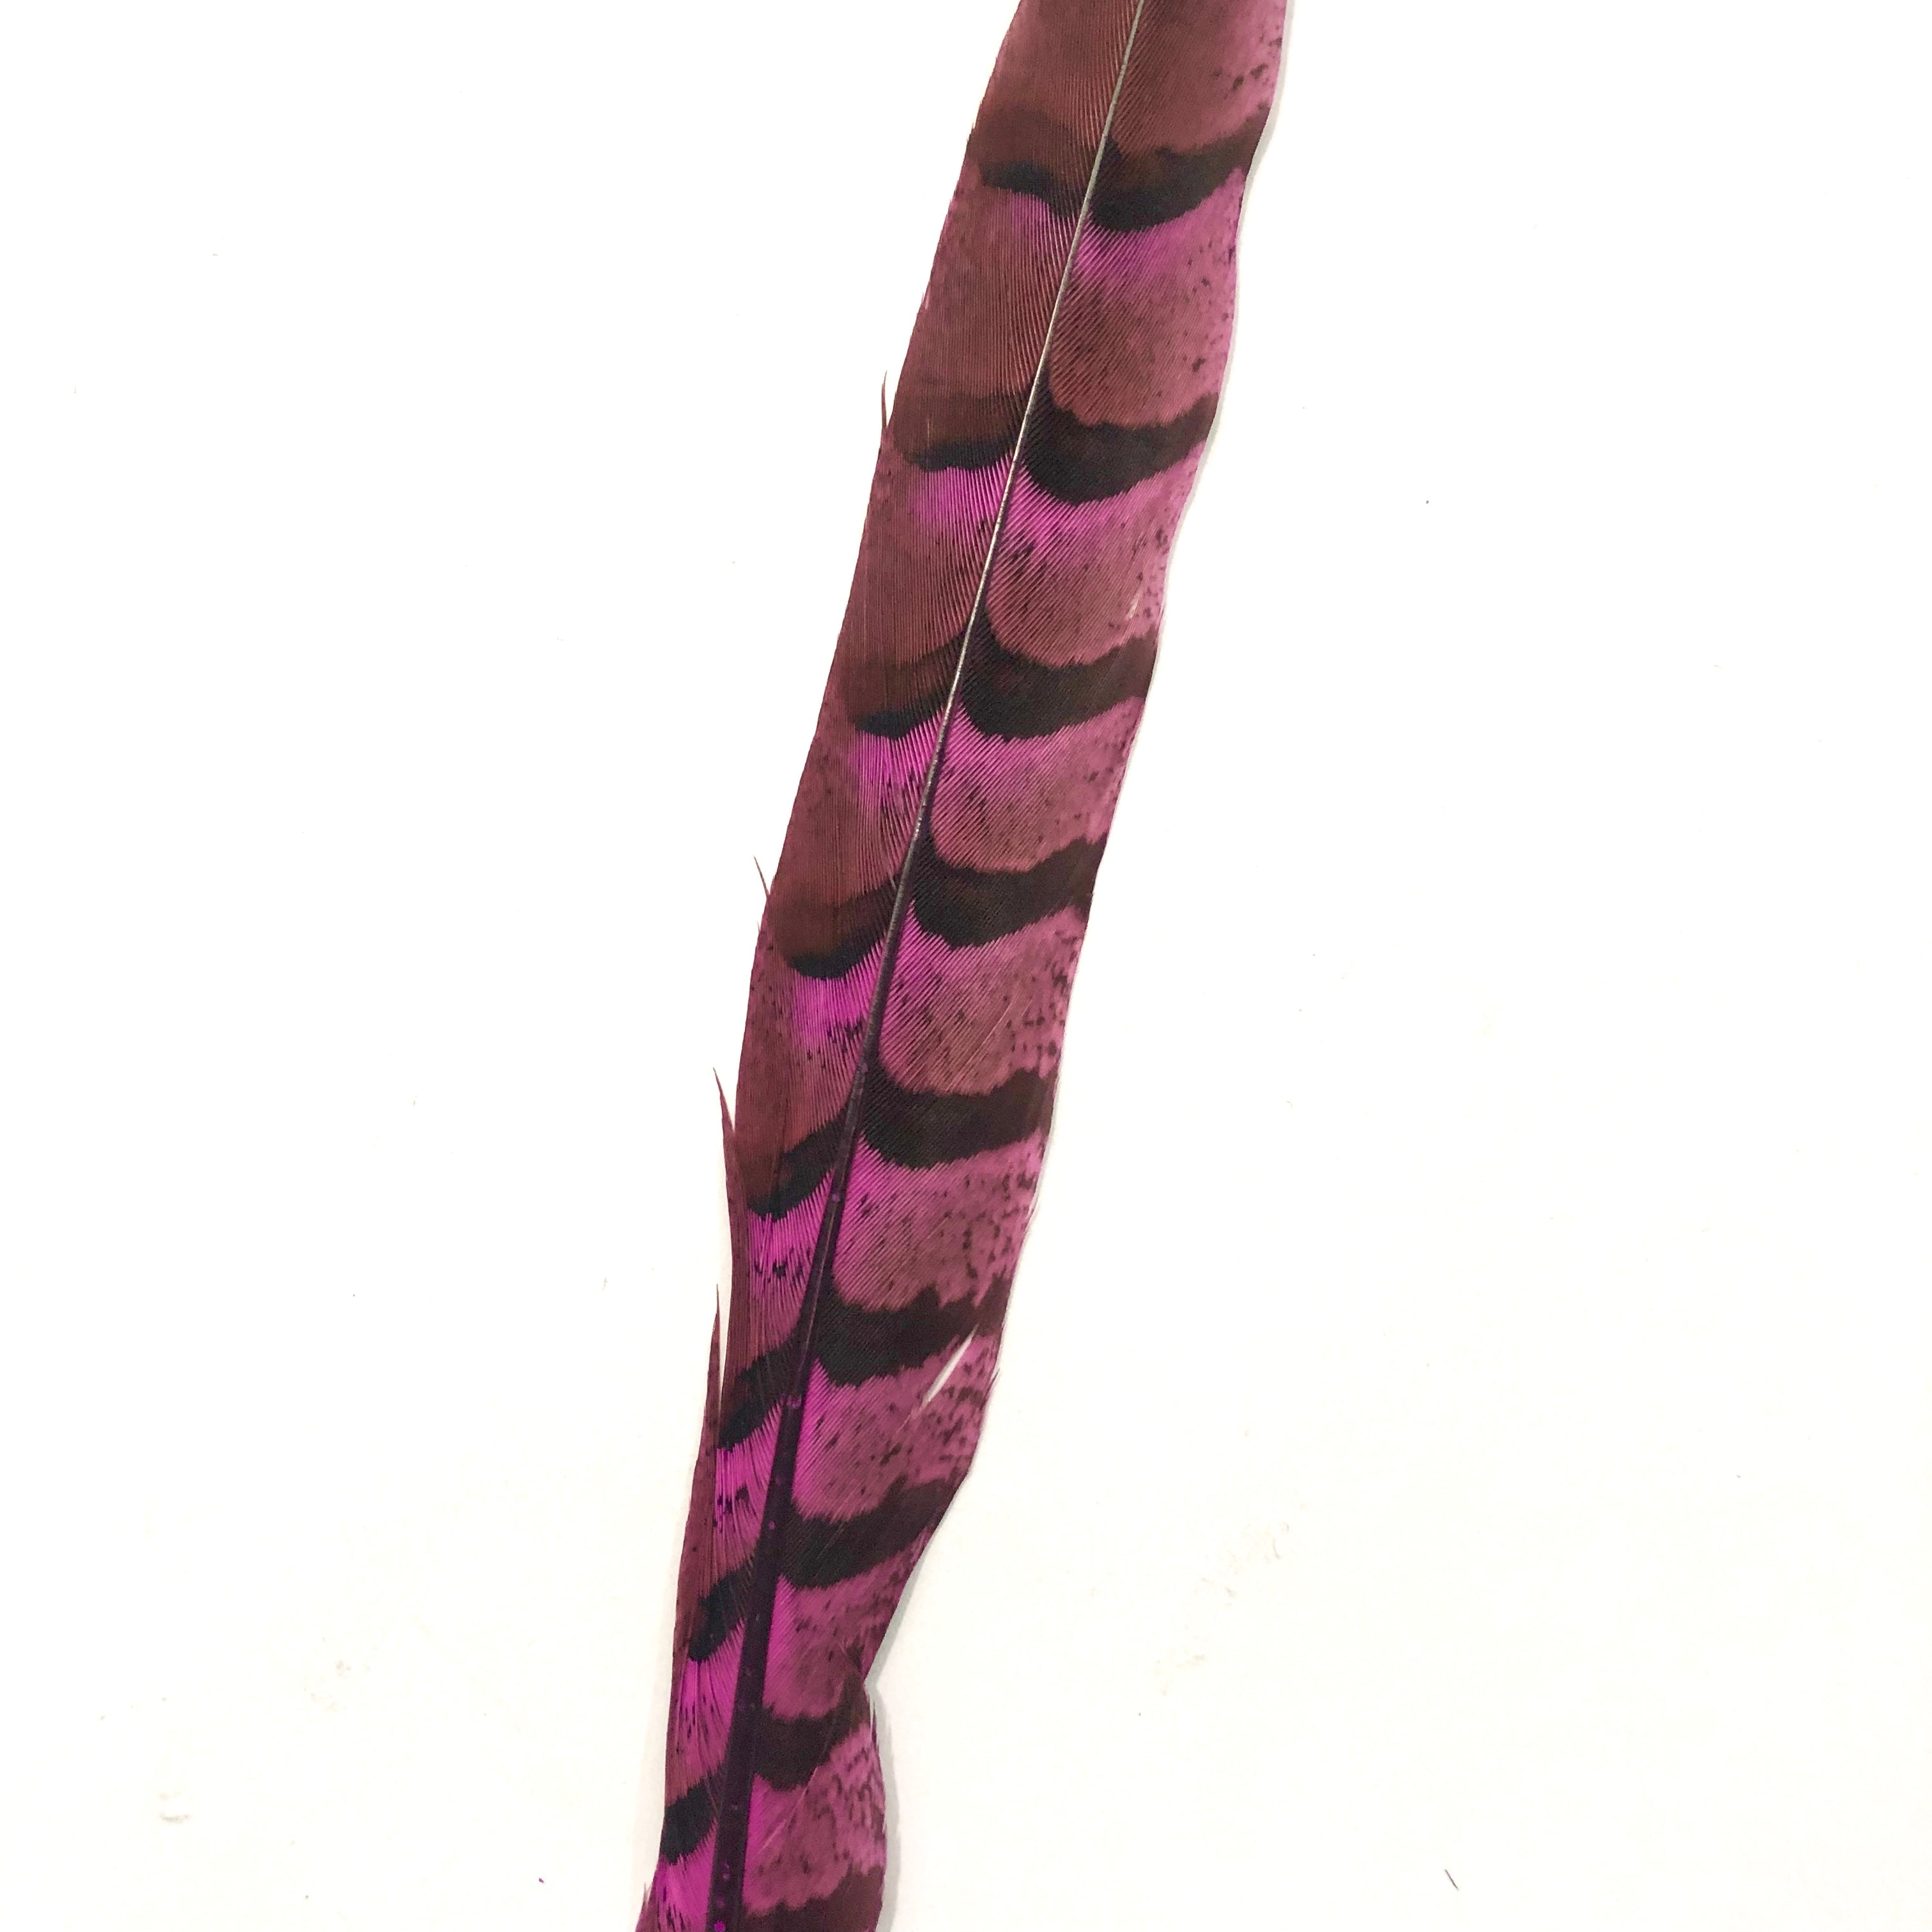 8" to 10" Reeves Pheasant Tail Feather - Hot Pink